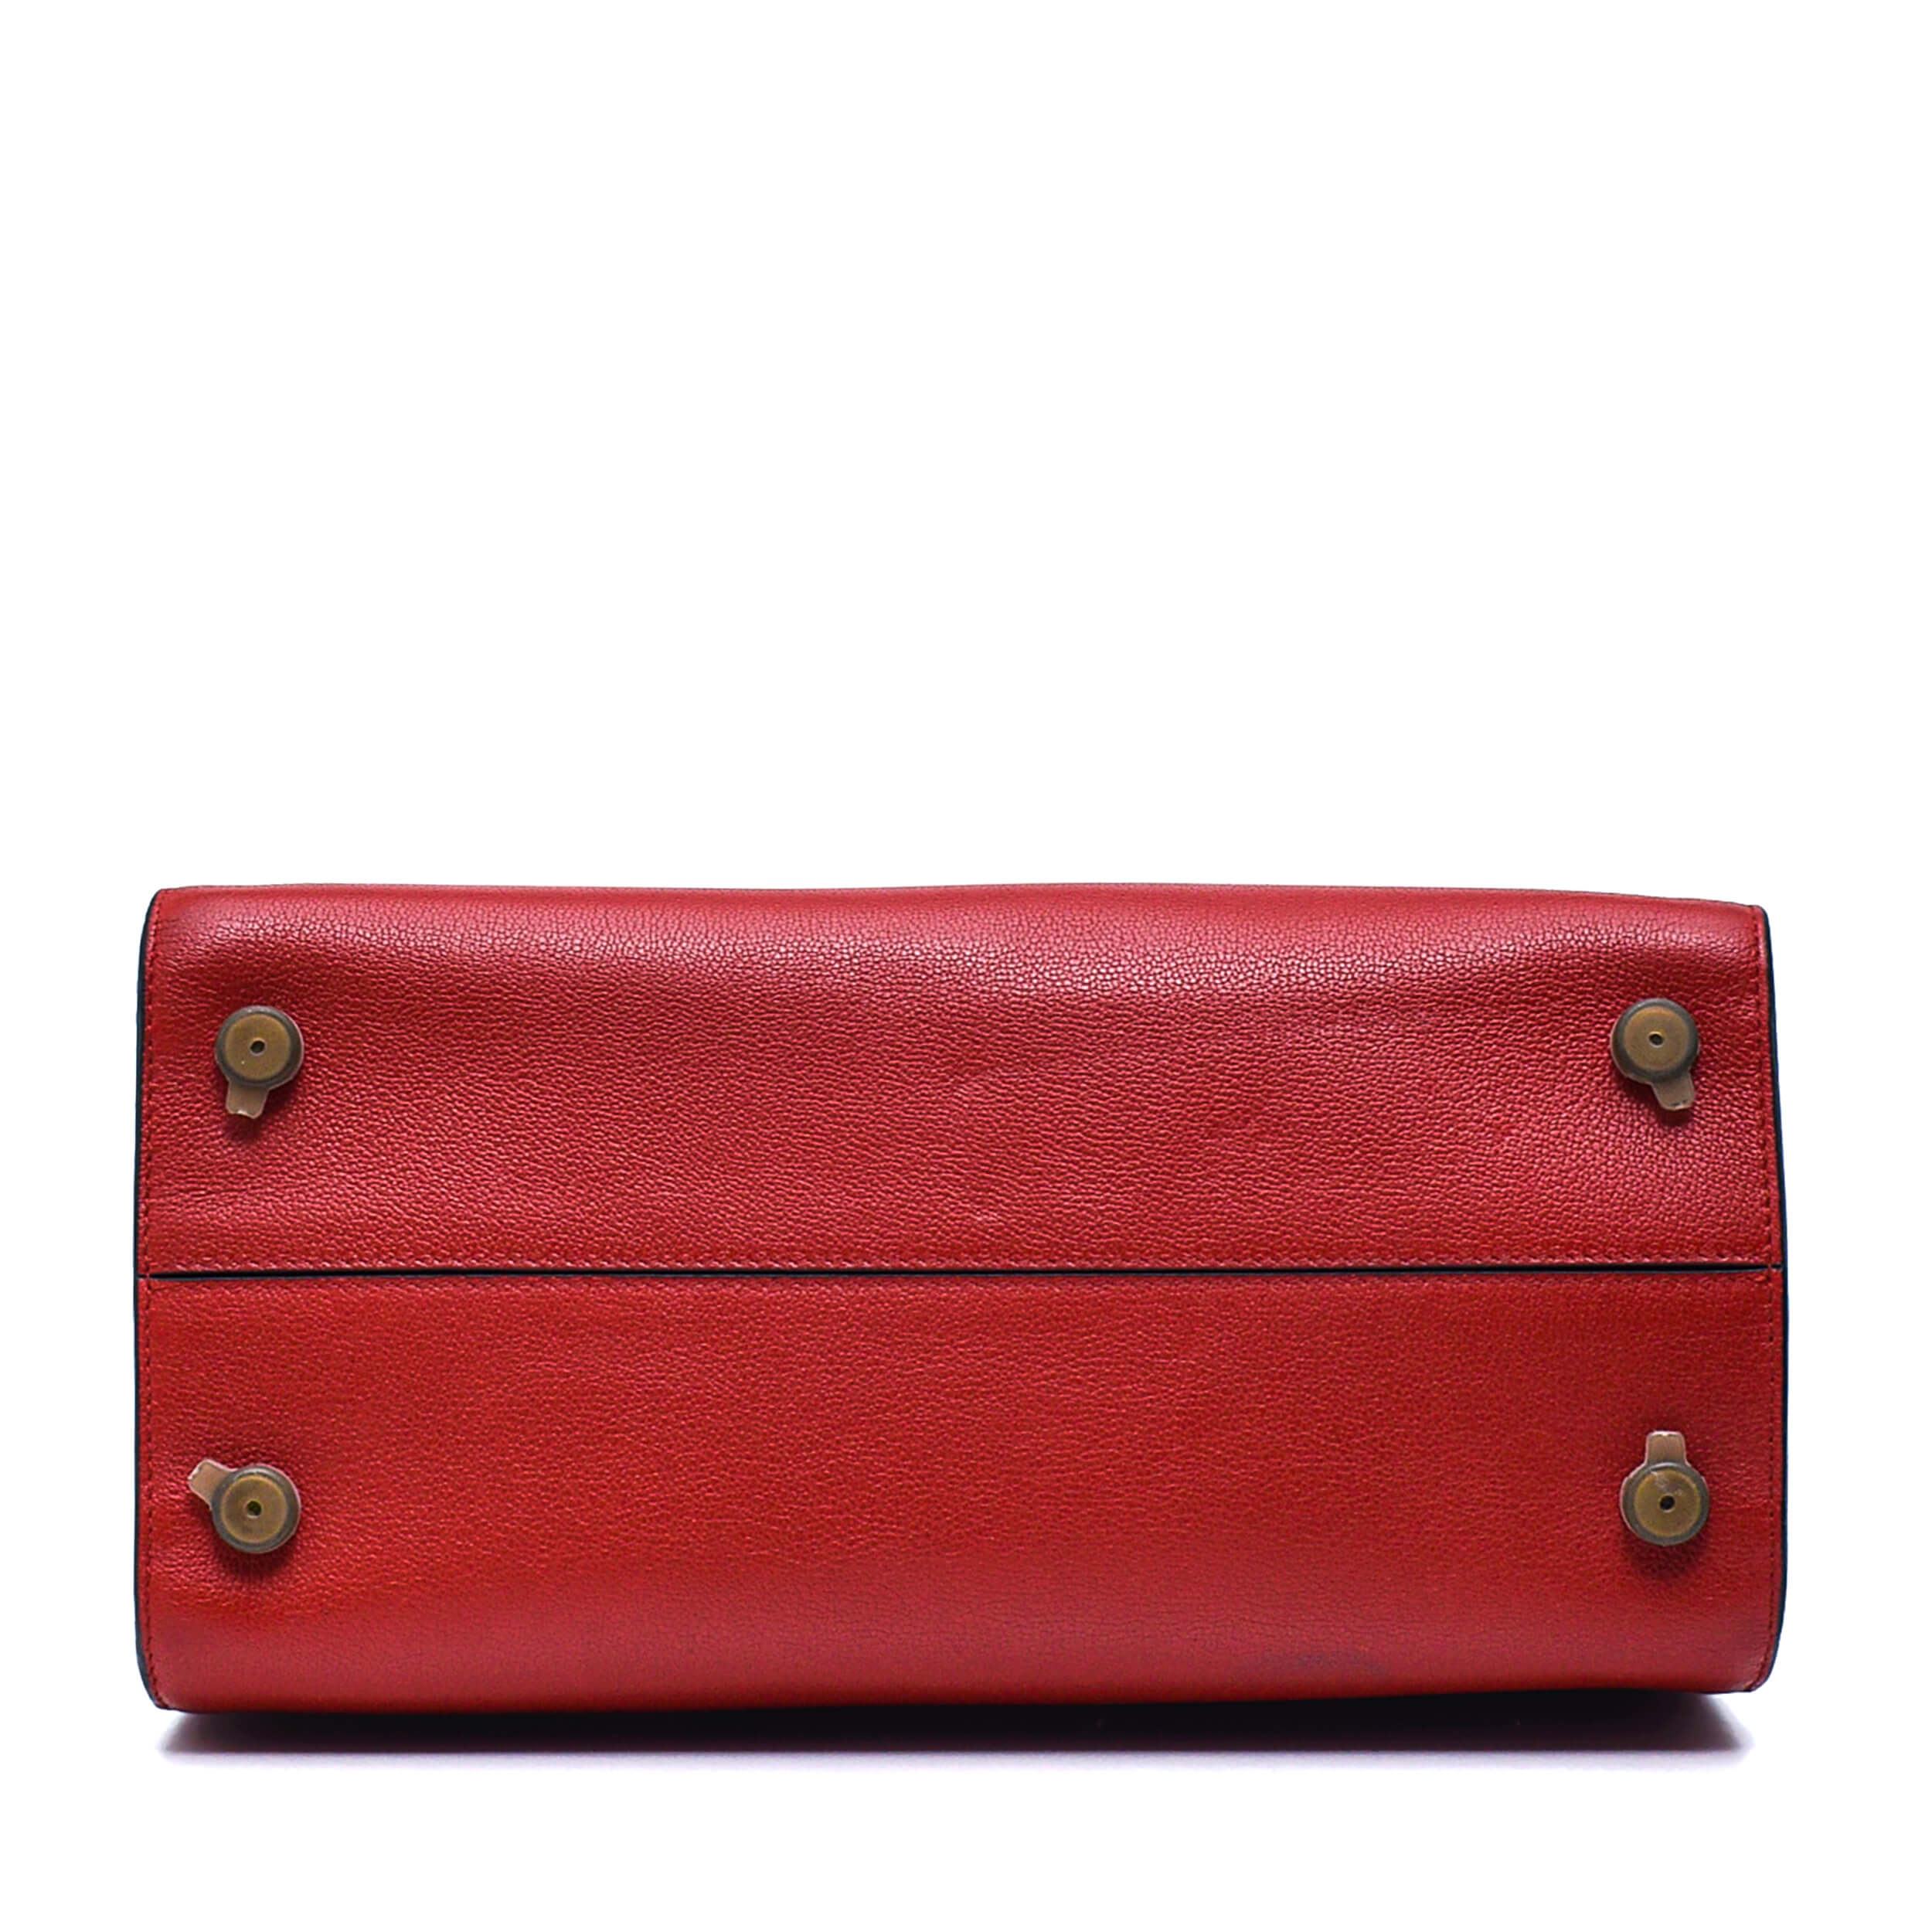 Christian Dior- Red Leather Diorever Bag